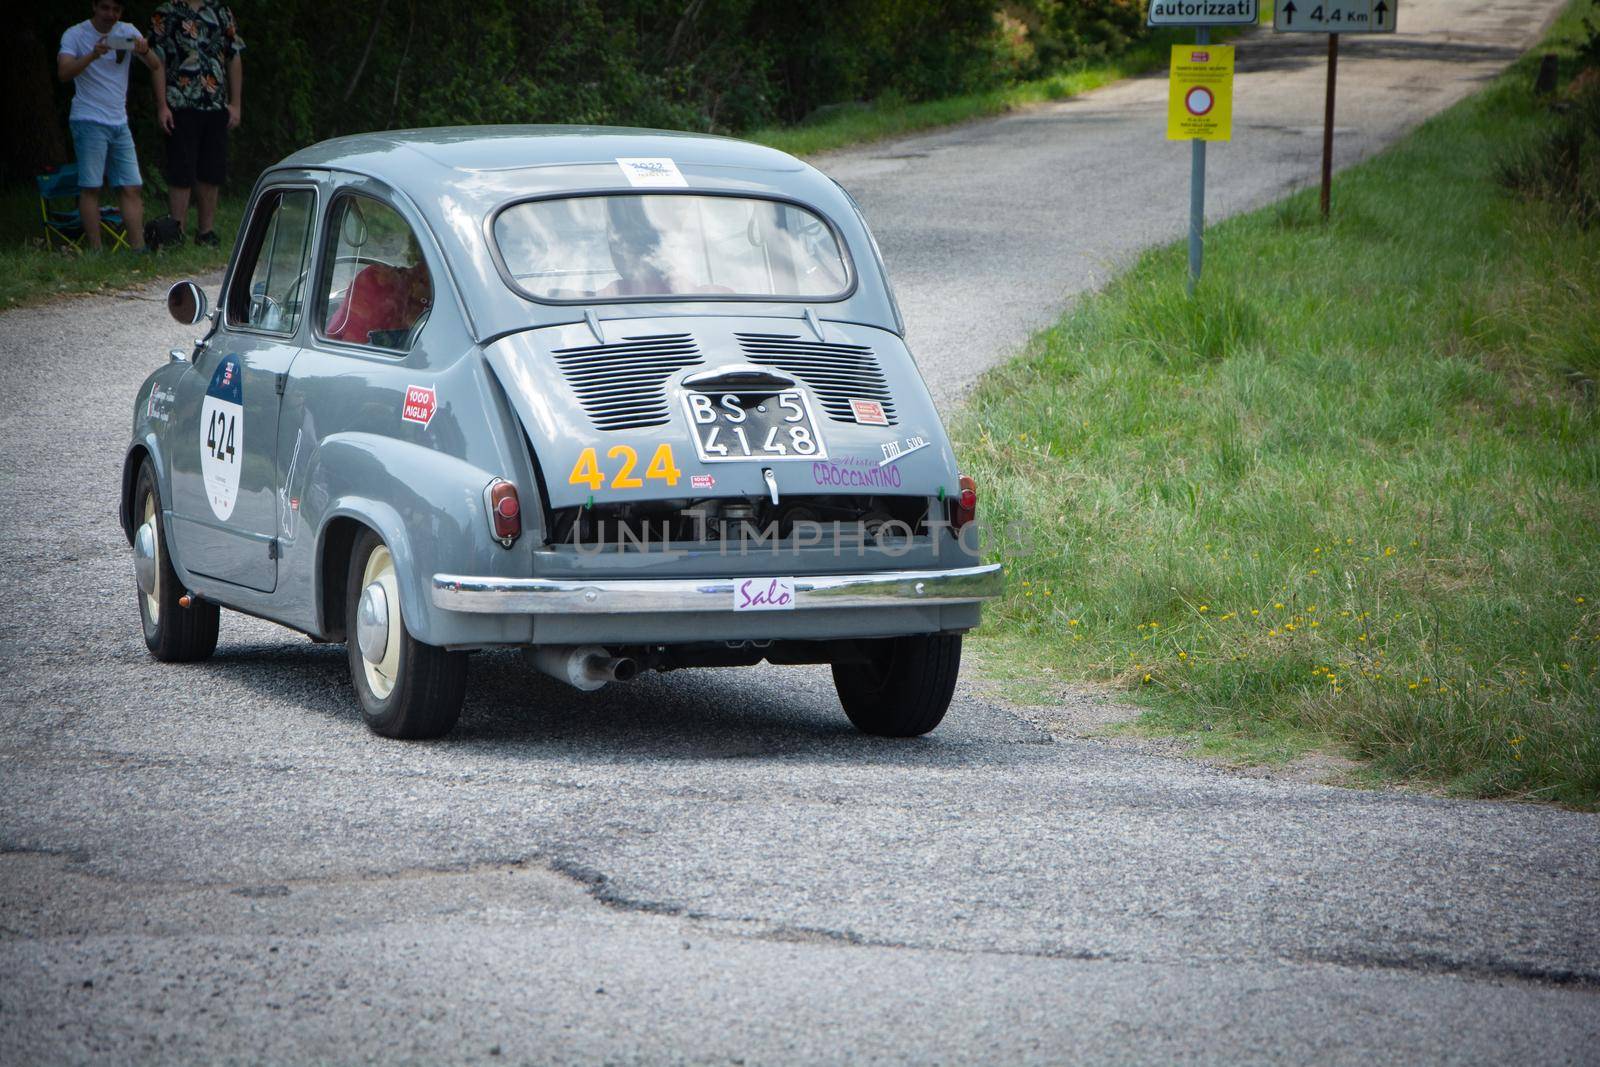 FIAT 600 1956 on an old racing car in rally Mille Miglia 2022 the famous italian historical race (1927-1957 by massimocampanari